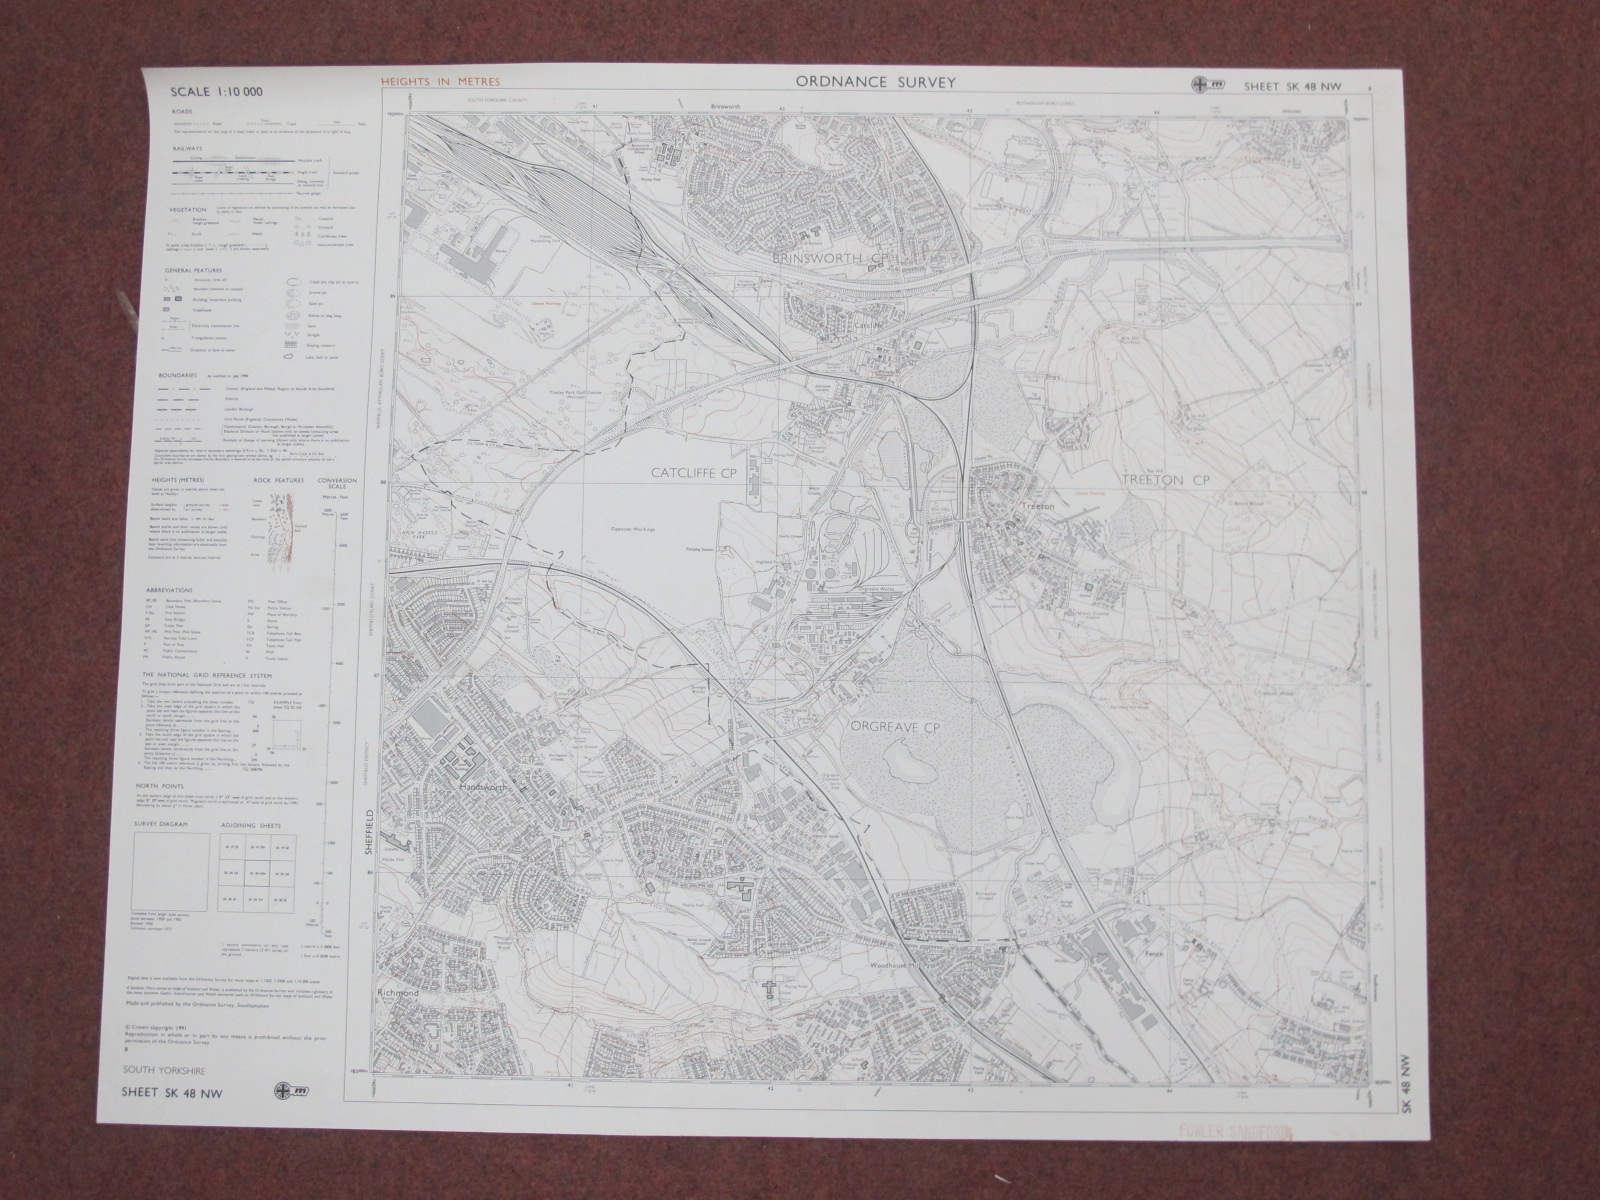 West Riding Yorkshire Maps, Rotherham and area, some dates noted - 1889, 1903, 1959, 1960, various - Image 5 of 10